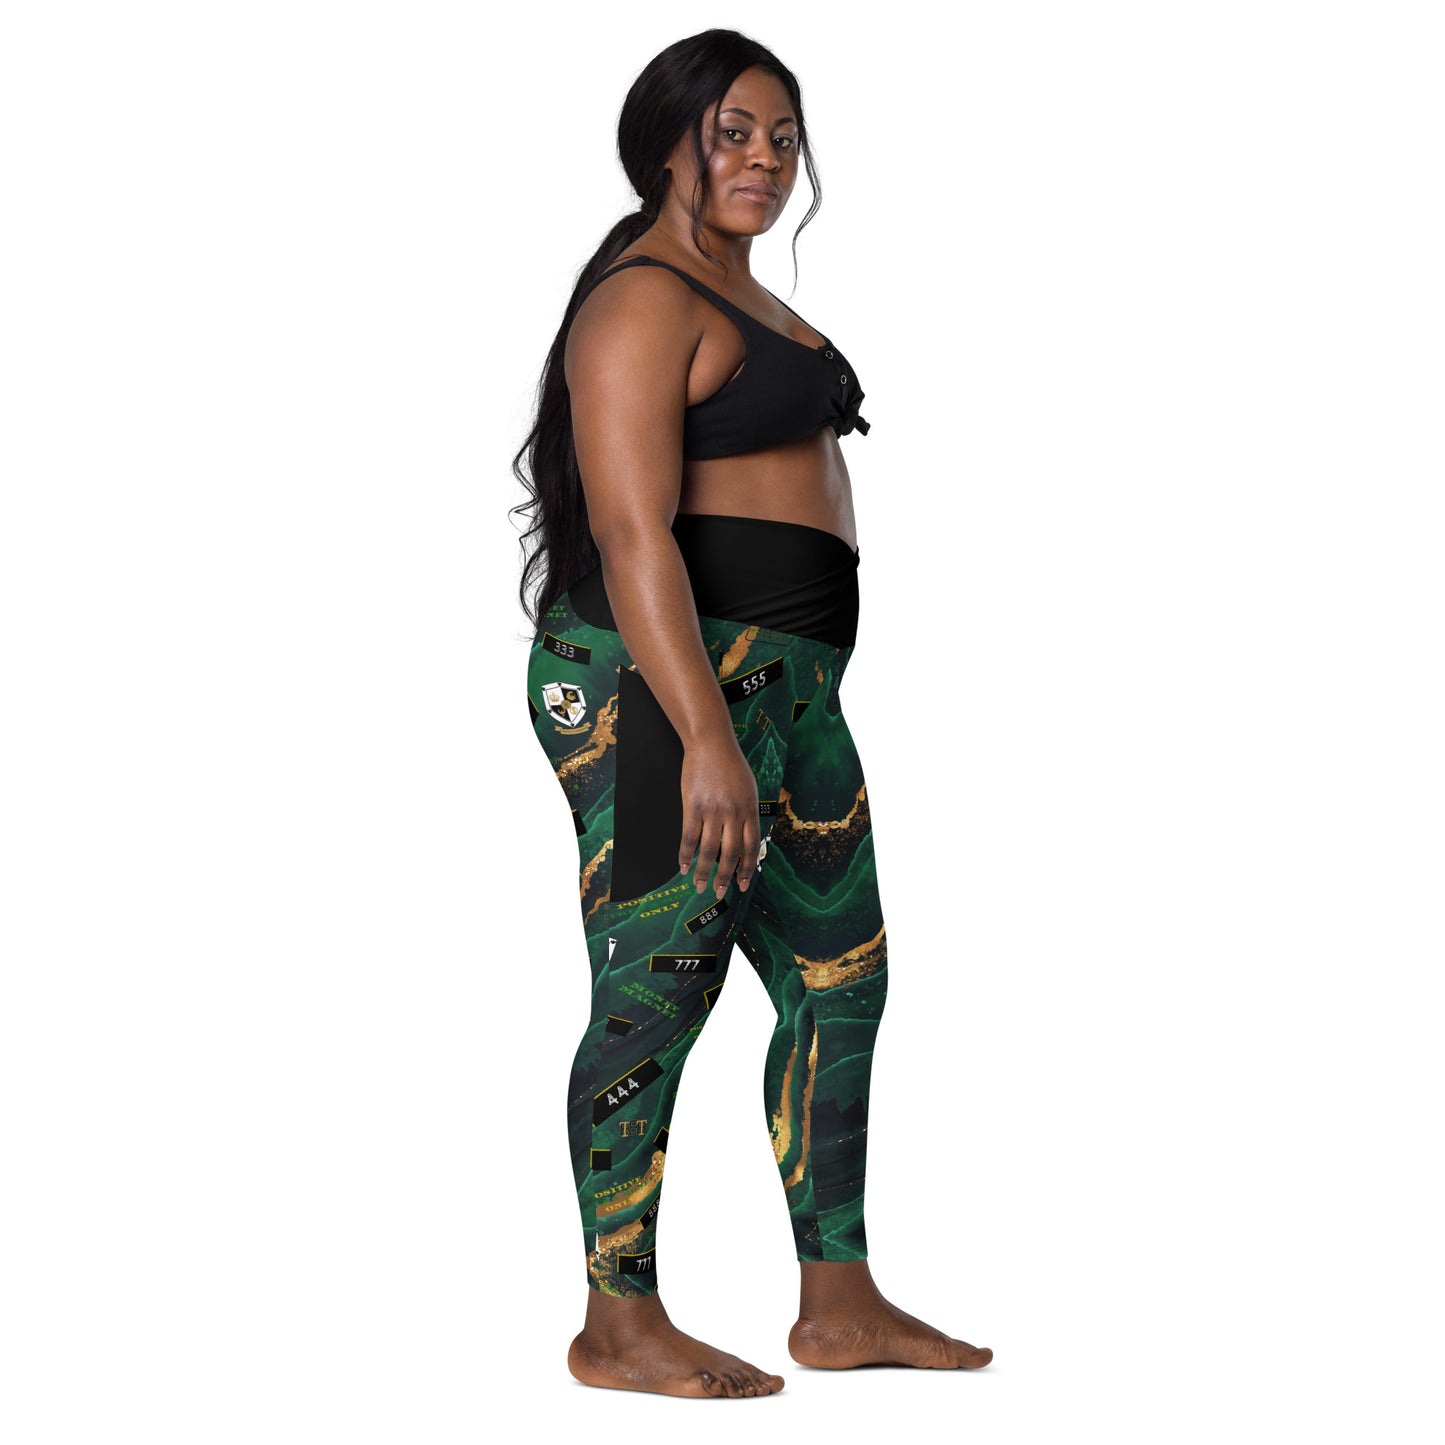 8xquiZit Collection - Women's Manifestation Emerald Green N Gold Marble Crossover Leggings with Pockets